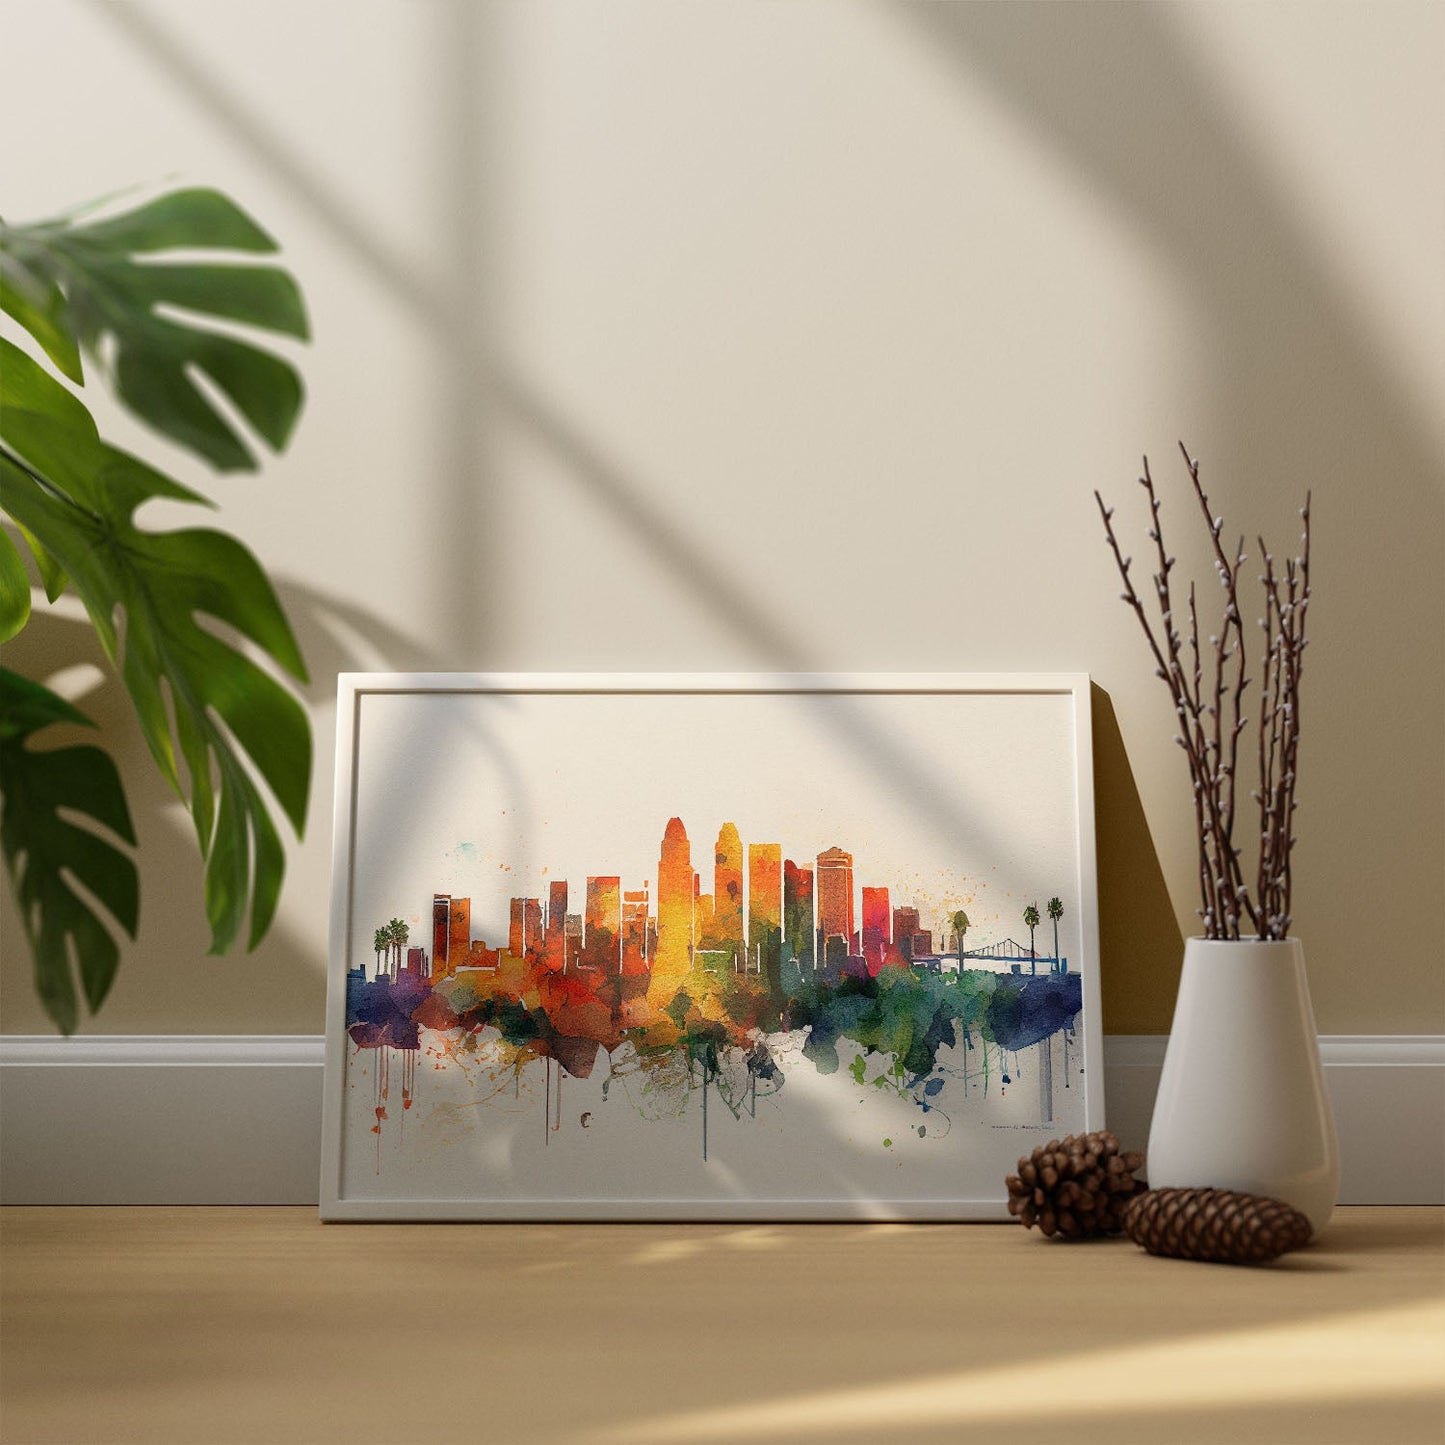 Nacnic watercolor of a skyline of the city of Los Angeles_2. Aesthetic Wall Art Prints for Bedroom or Living Room Design.-Artwork-Nacnic-A4-Sin Marco-Nacnic Estudio SL